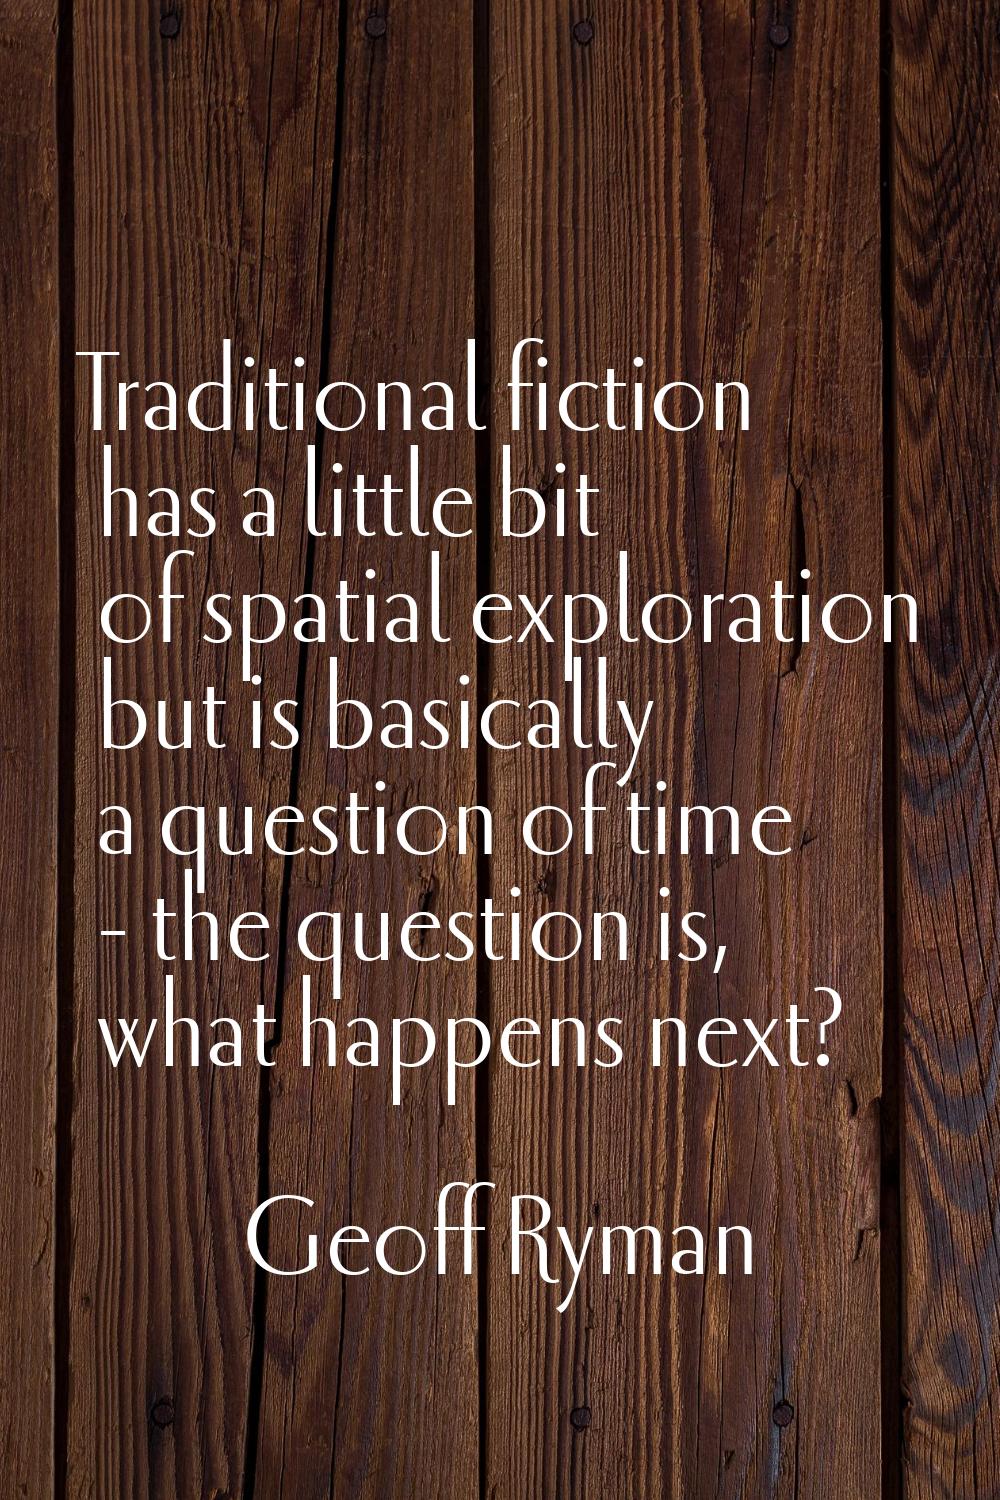 Traditional fiction has a little bit of spatial exploration but is basically a question of time - t